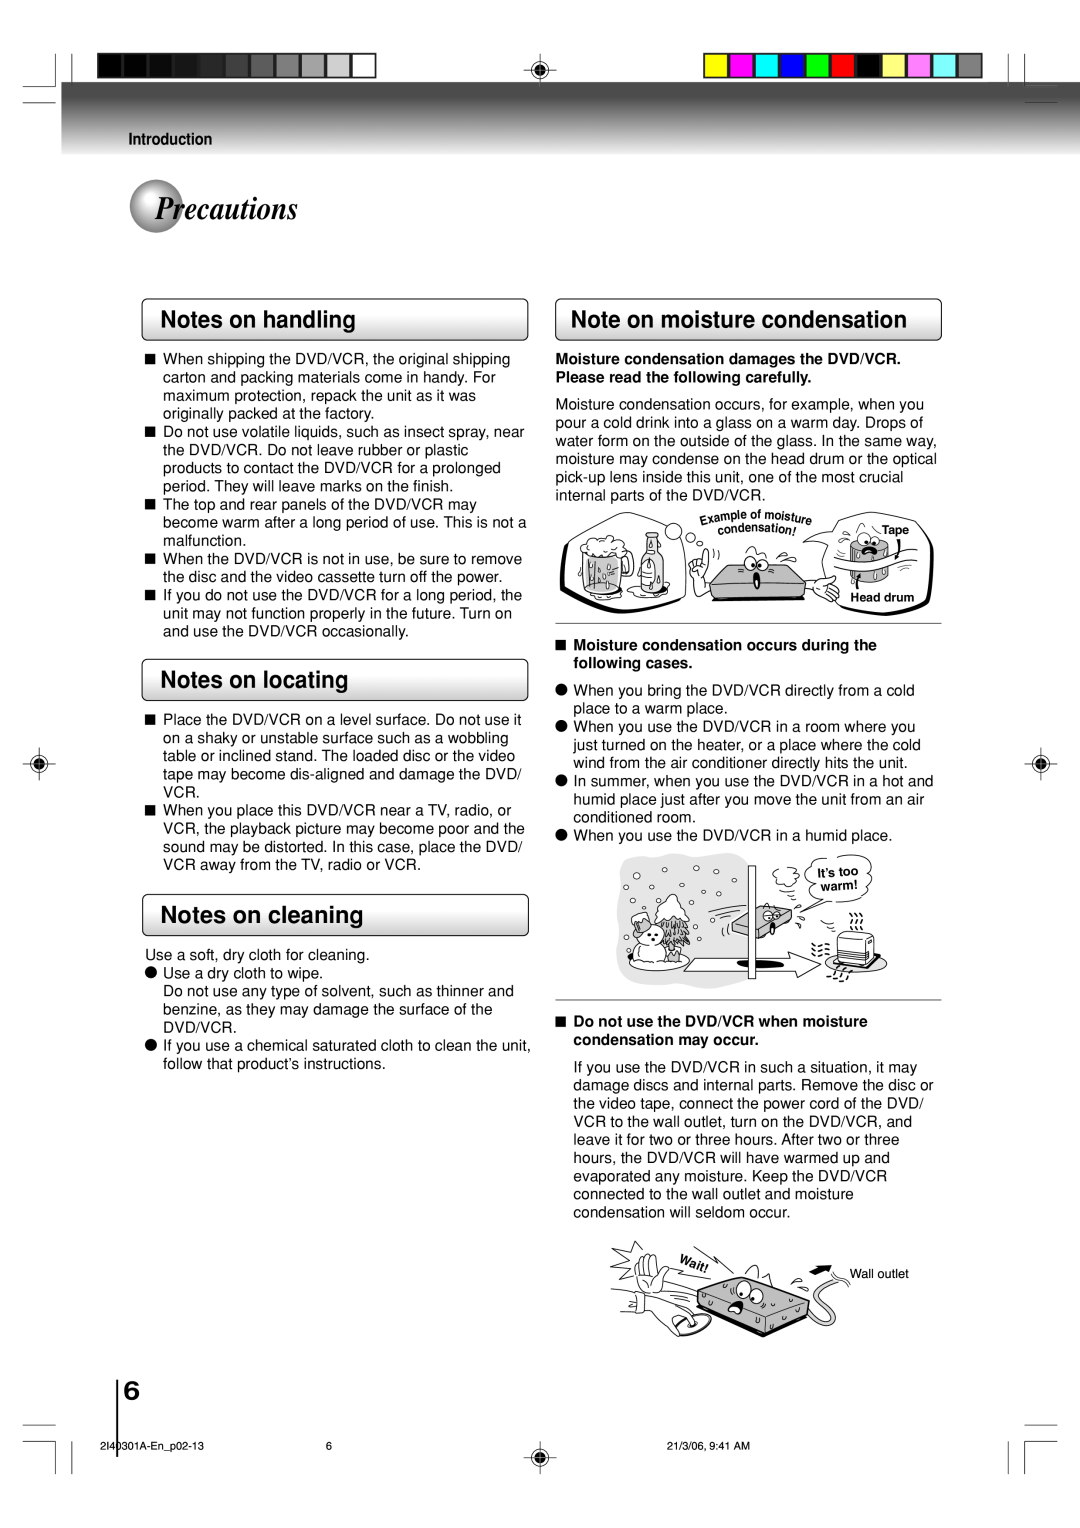 Toshiba SD-V594SC Precautions, Notes on handling, Note on moisture condensation, Notes on locating, Notes on cleaning 